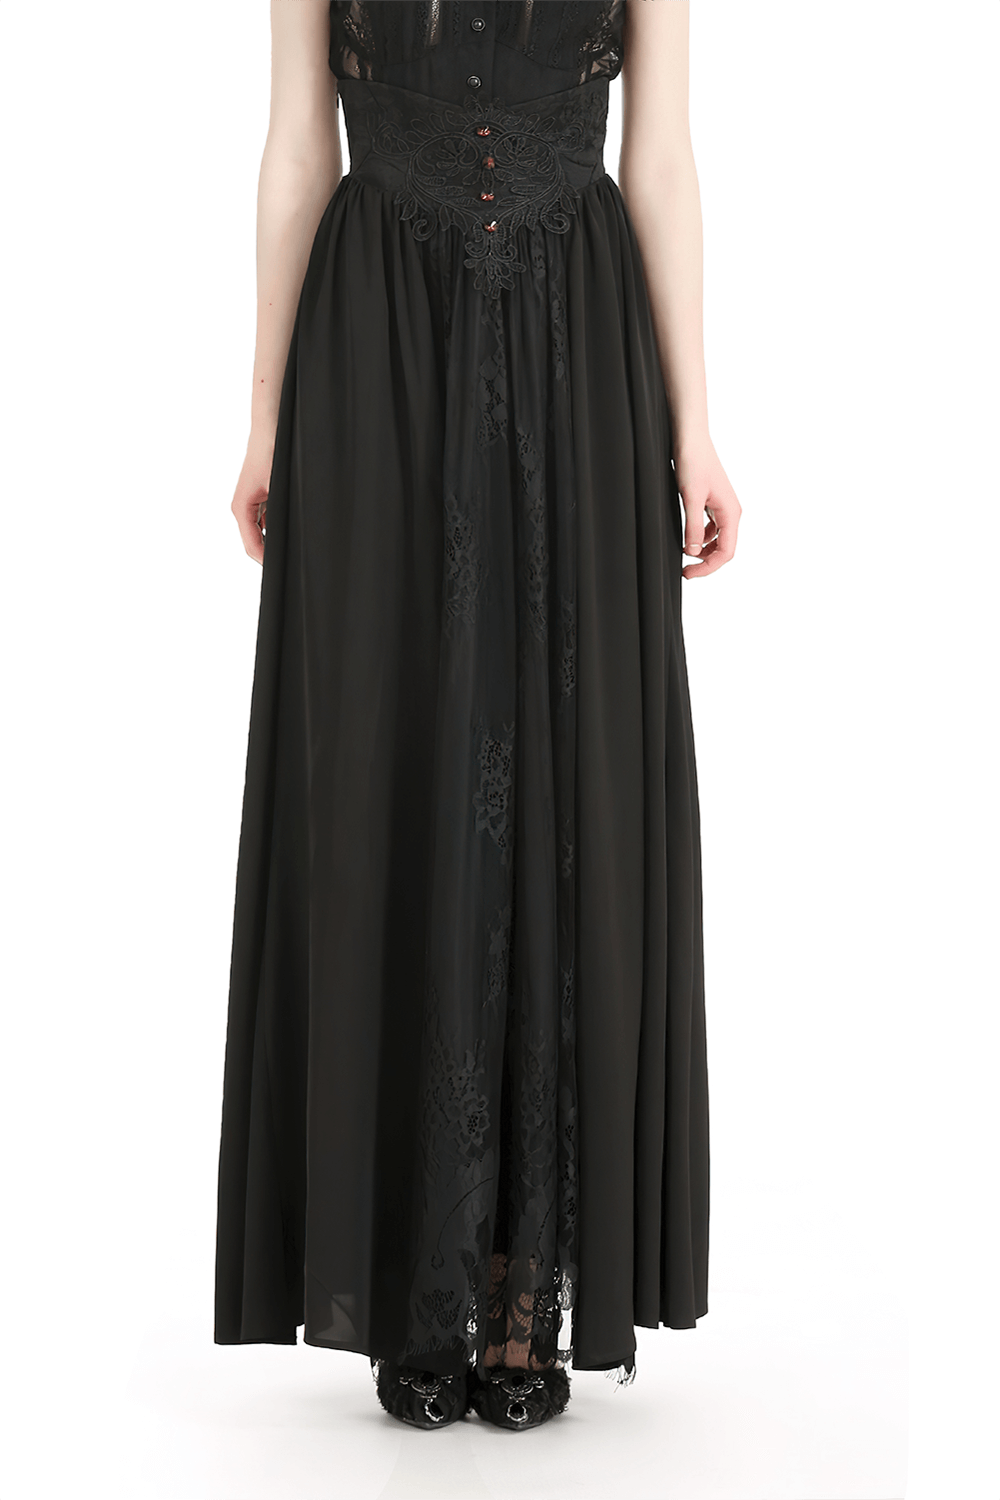 Elegant Lace High Waist Long Skirt with Button Accents